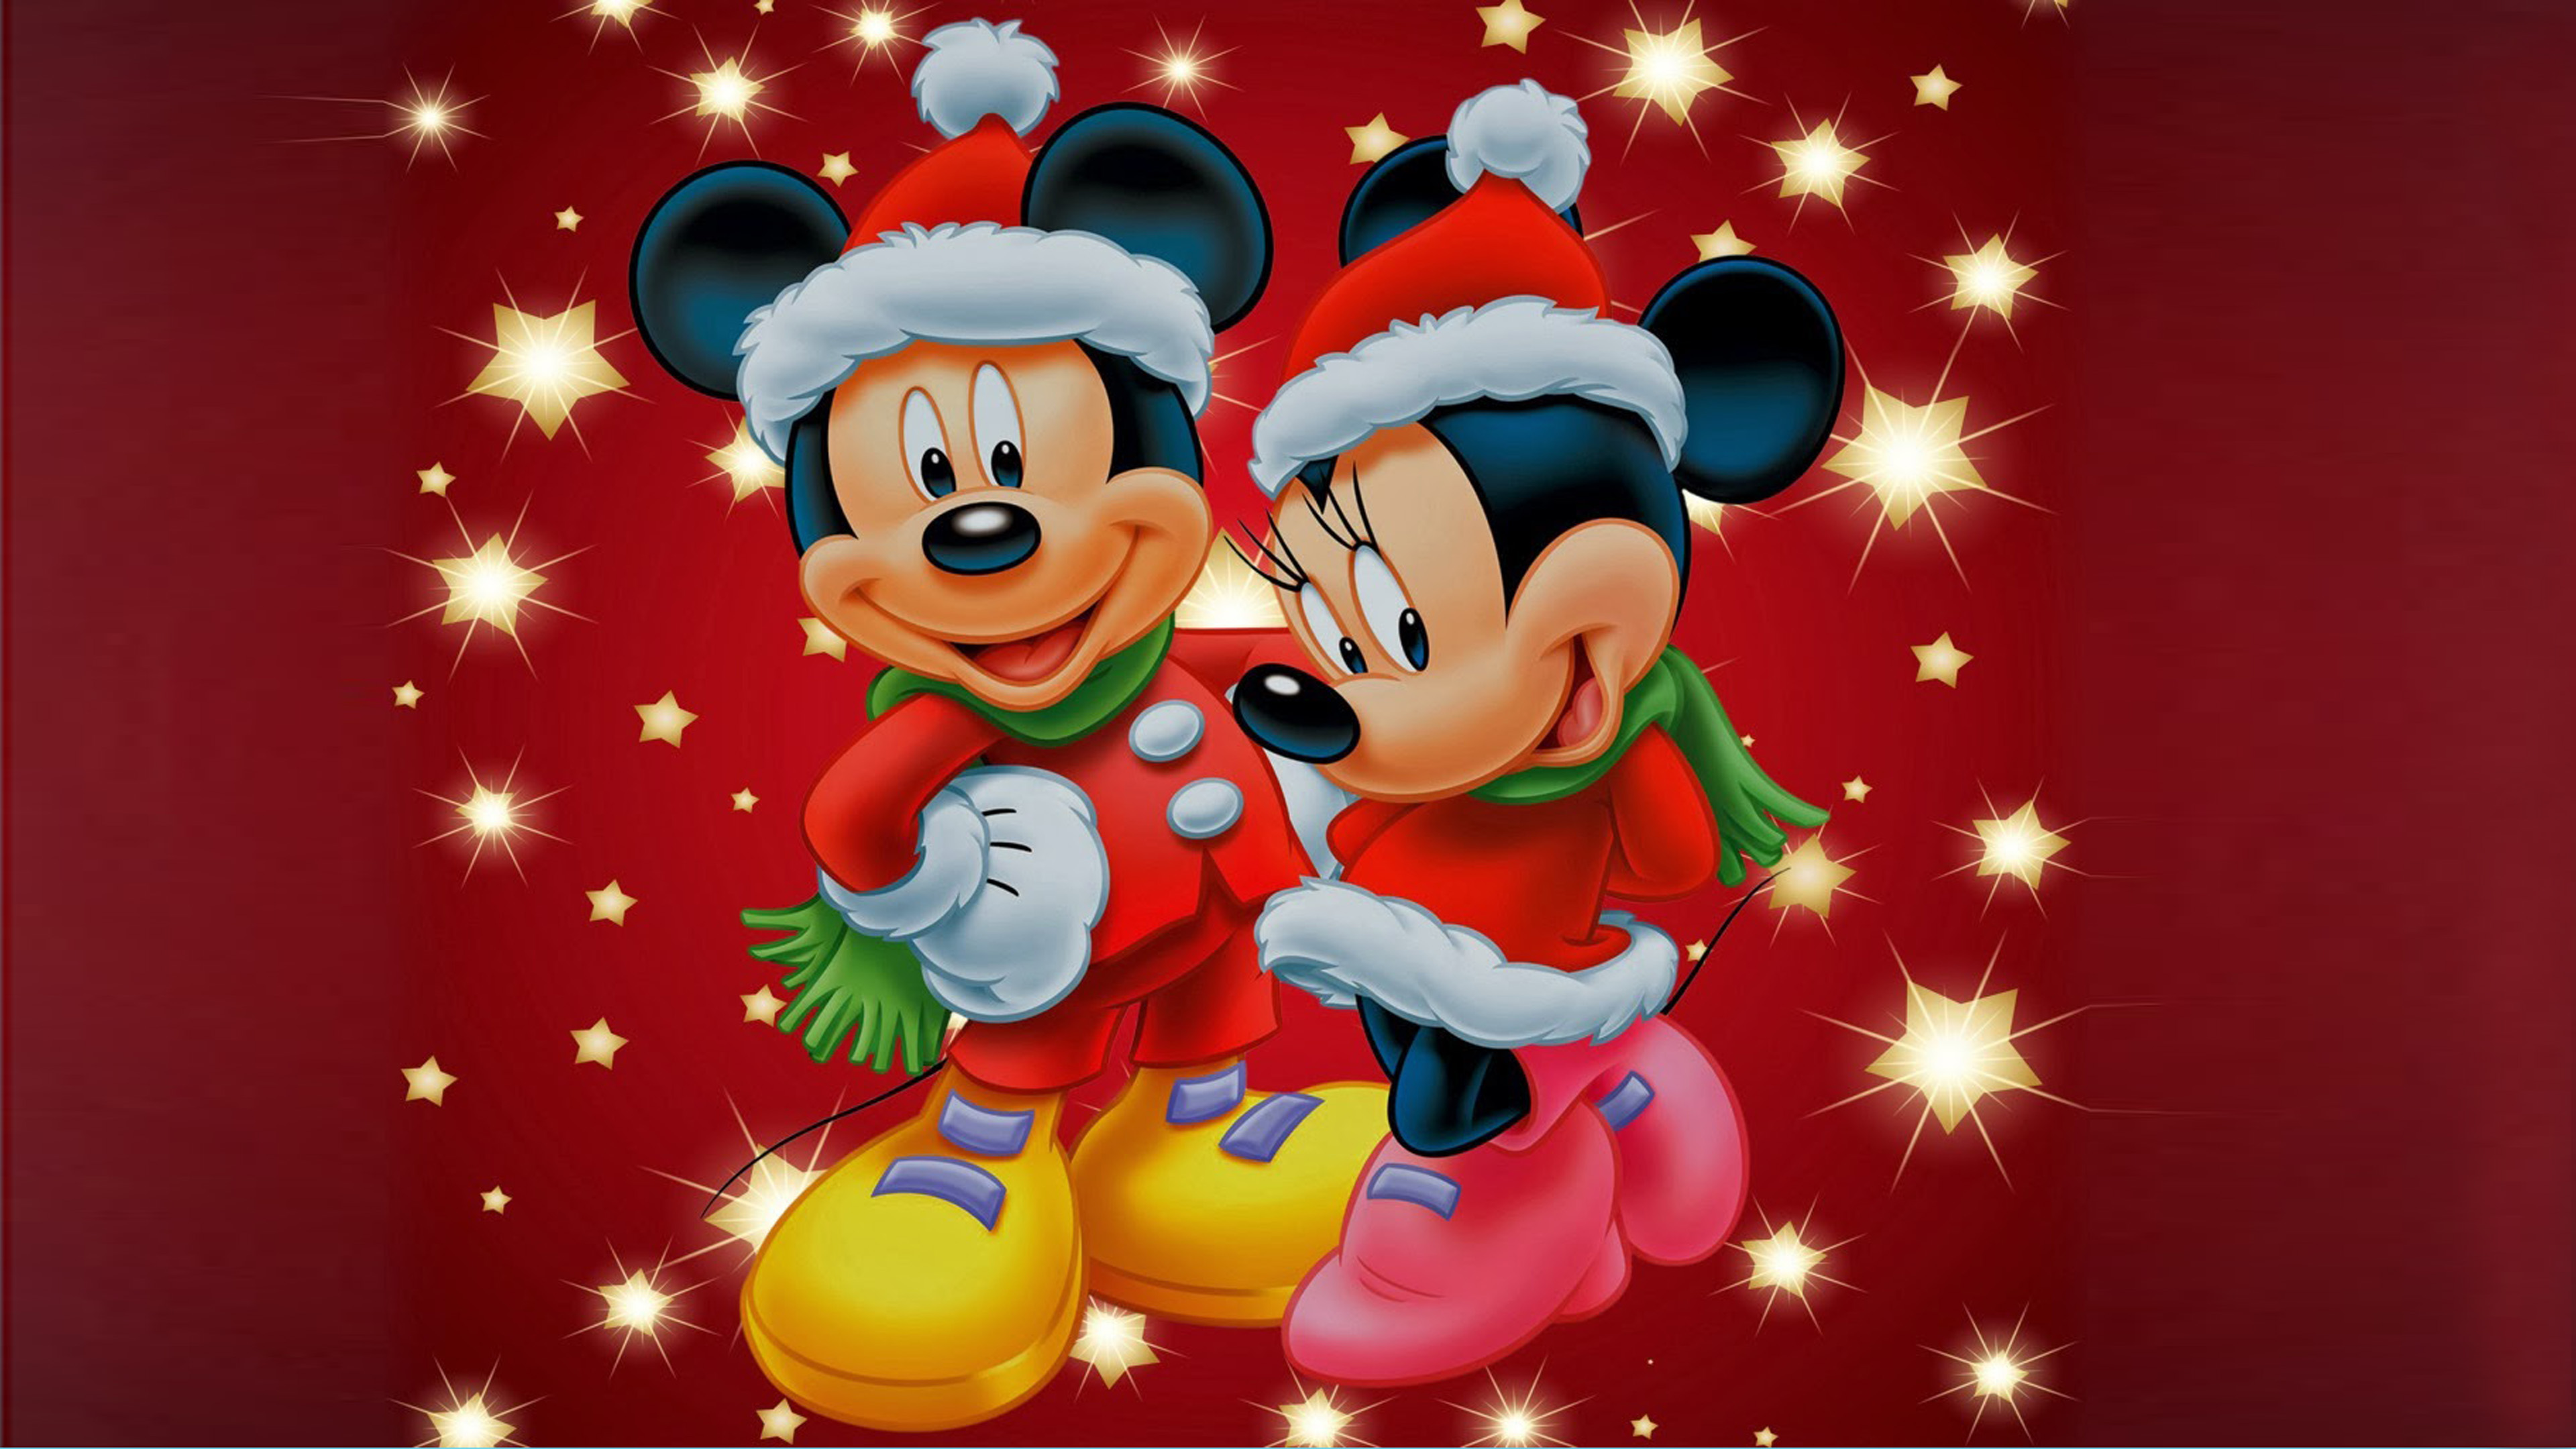 Mickey And Minnie Mouse Christmas Theme Desktop Wallpaper Hd For Mobile